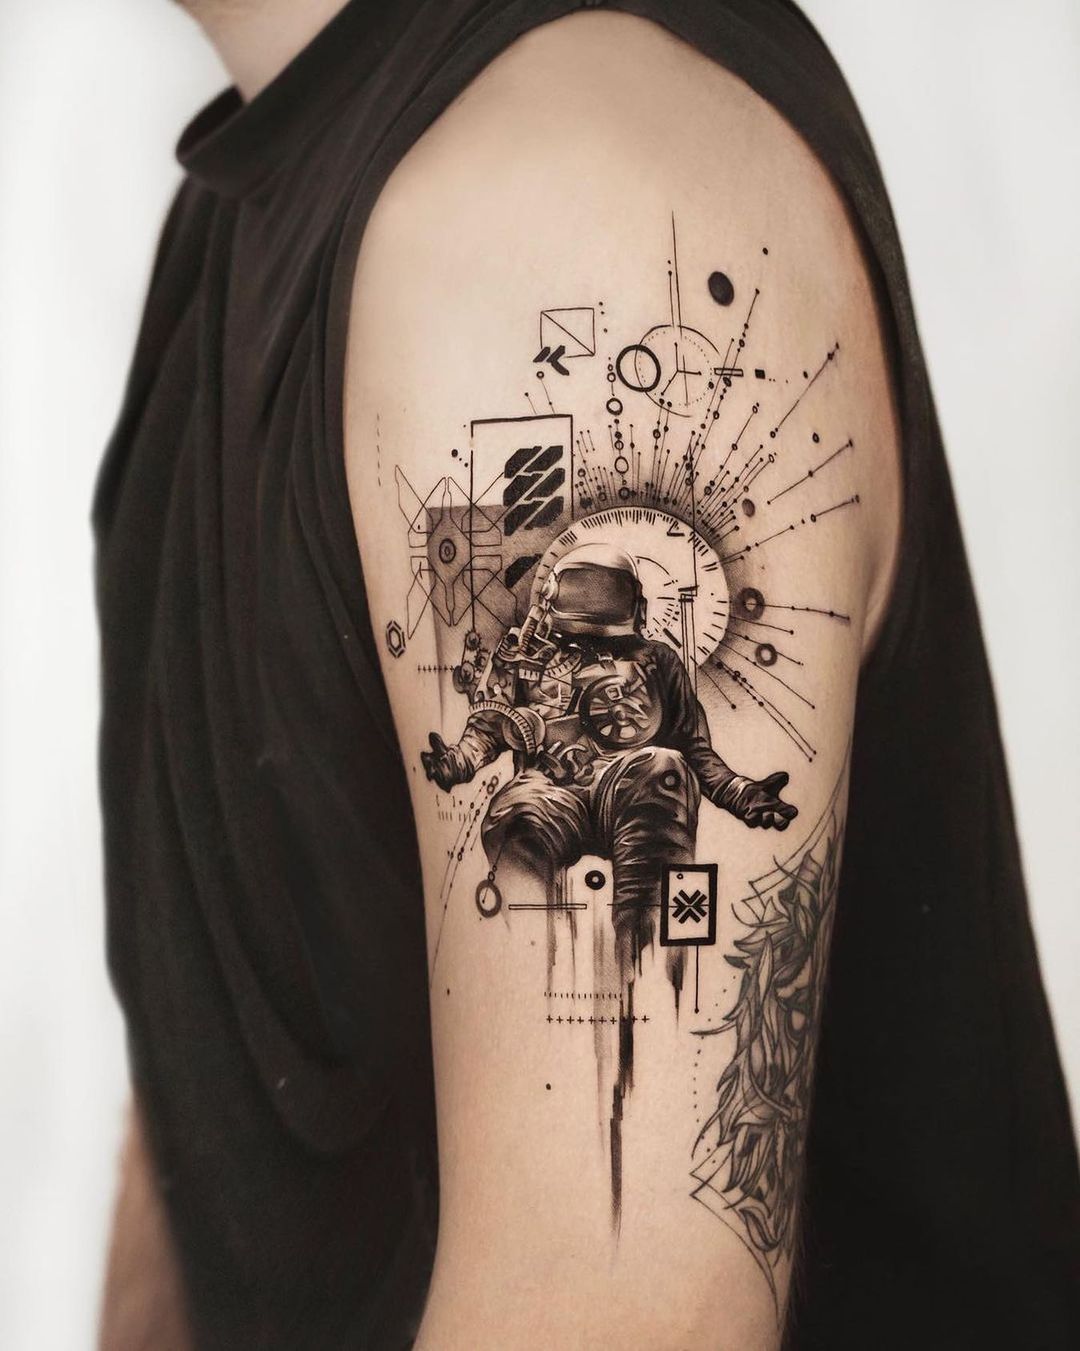 Outer space astranaut tattoo by hood.seven